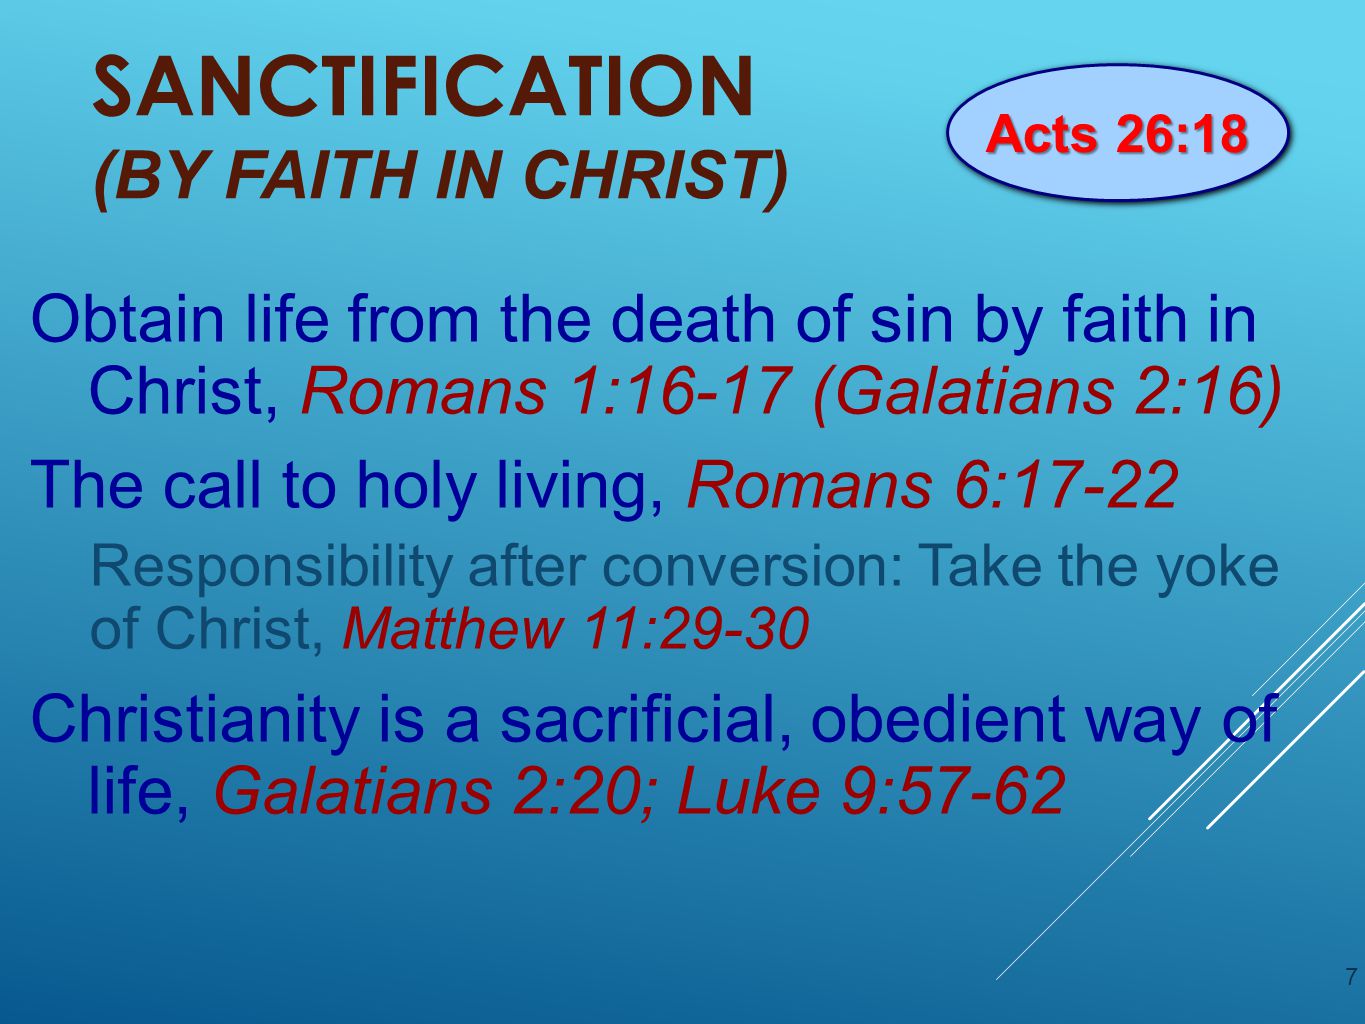 SANCTIFICATION (BY FAITH IN CHRIST) Obtain life from the death of sin by faith in Christ, Romans 1:16-17 (Galatians 2:16) The call to holy living, Romans 6:17-22 Responsibility after conversion: Take the yoke of Christ, Matthew 11:29-30 Christianity is a sacrificial, obedient way of life, Galatians 2:20; Luke 9: Acts 26:18